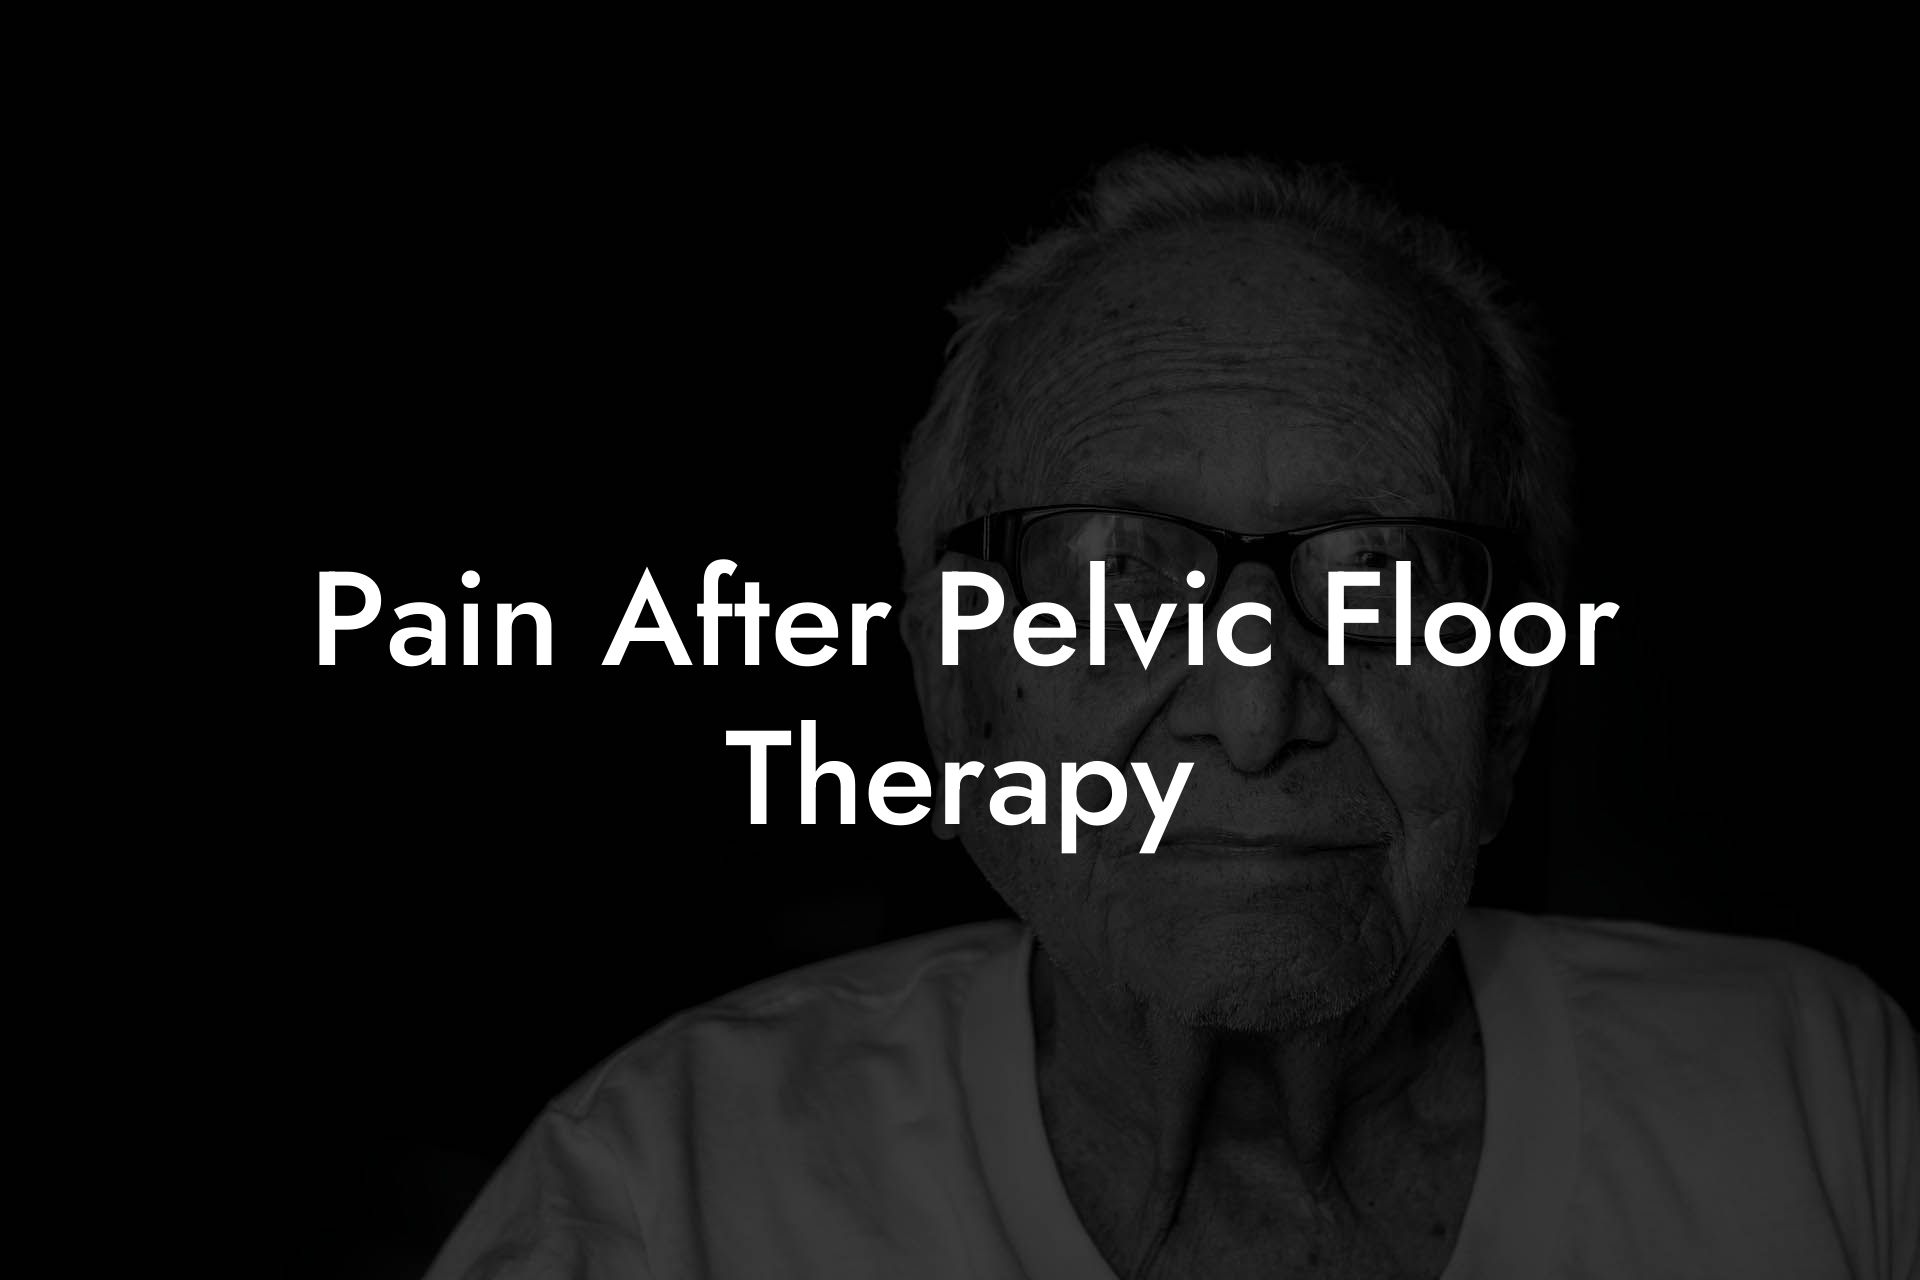 Pain After Pelvic Floor Therapy